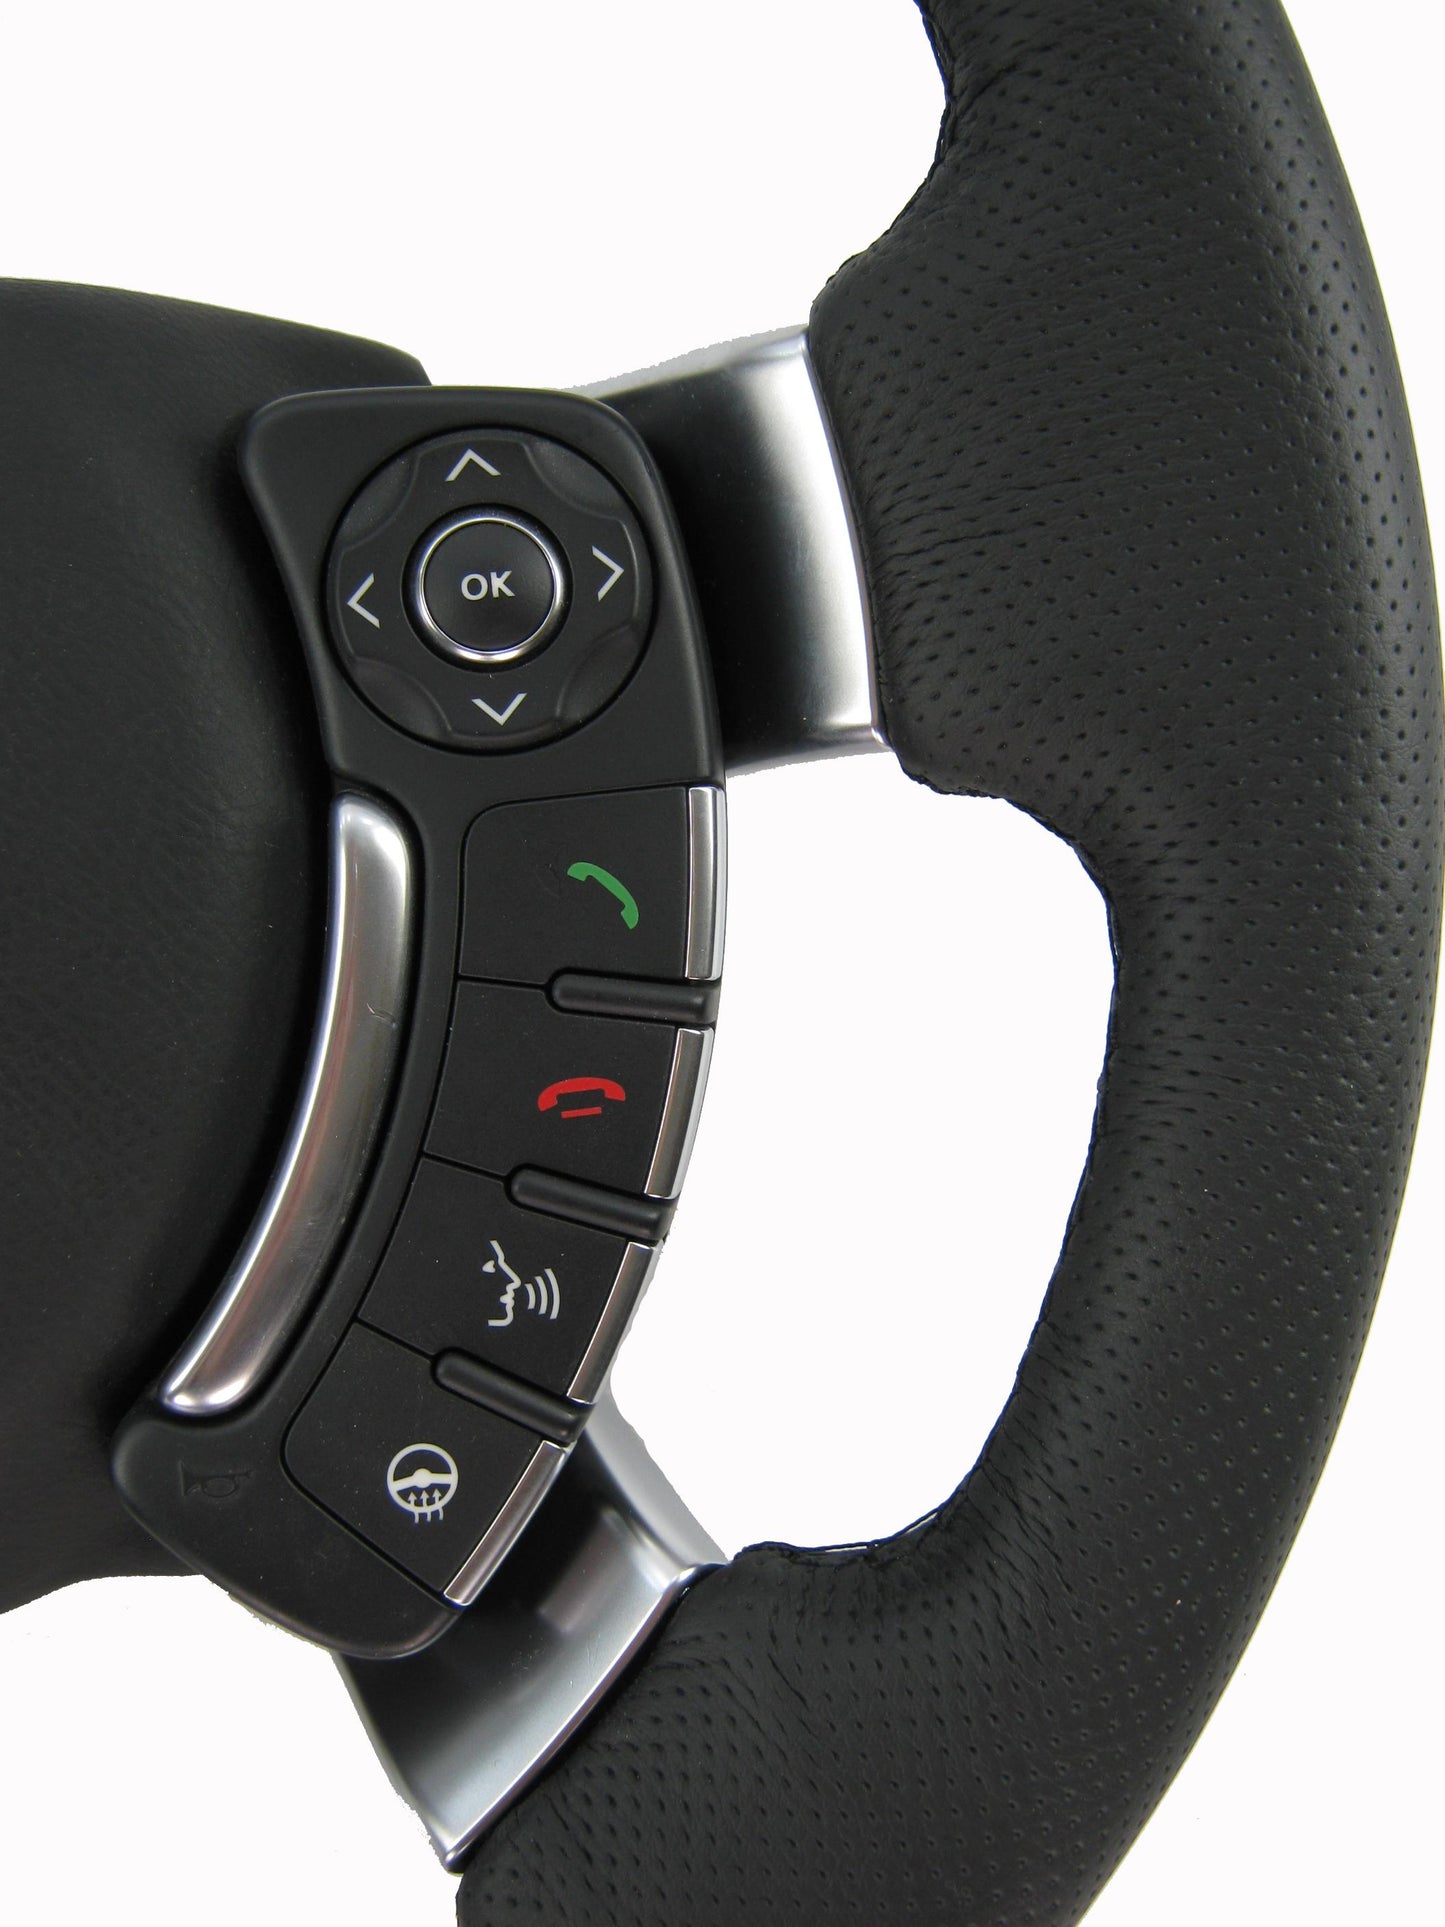 Steering Wheel - NON-Heated Napa - Perforated - with Chrome Spokes for Range Rover L322